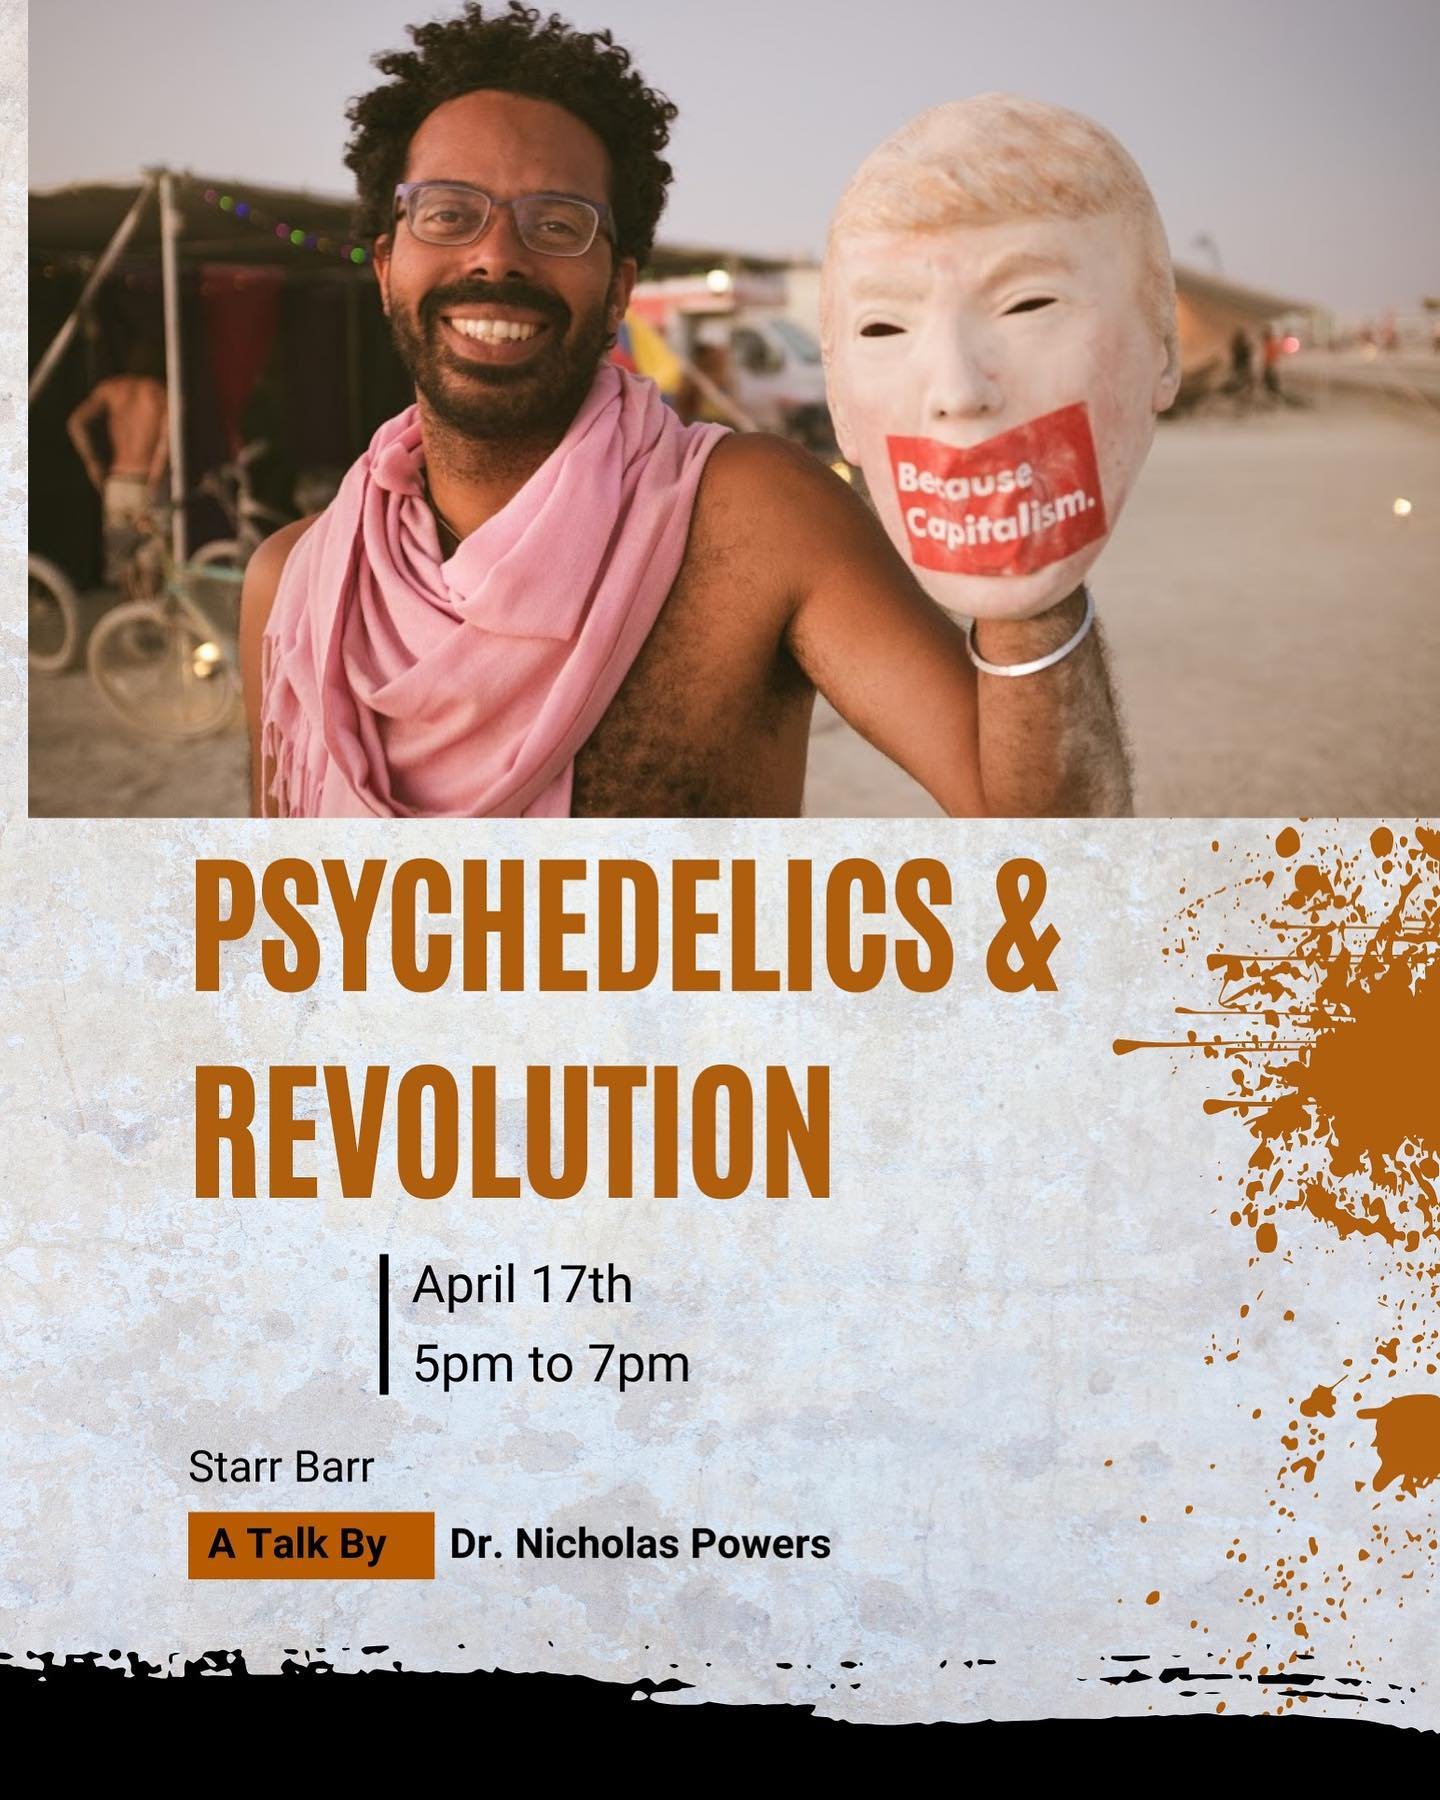 Black Psychedelic Revolution: Imagine Malcolm X on LSD. Join us at Starr Bar for a fascinating talk by Dr. Nicholas Powers on psychedelics and Black Revolutionary History and Theory.
He will share how healing in private therapy shares the dynamics of